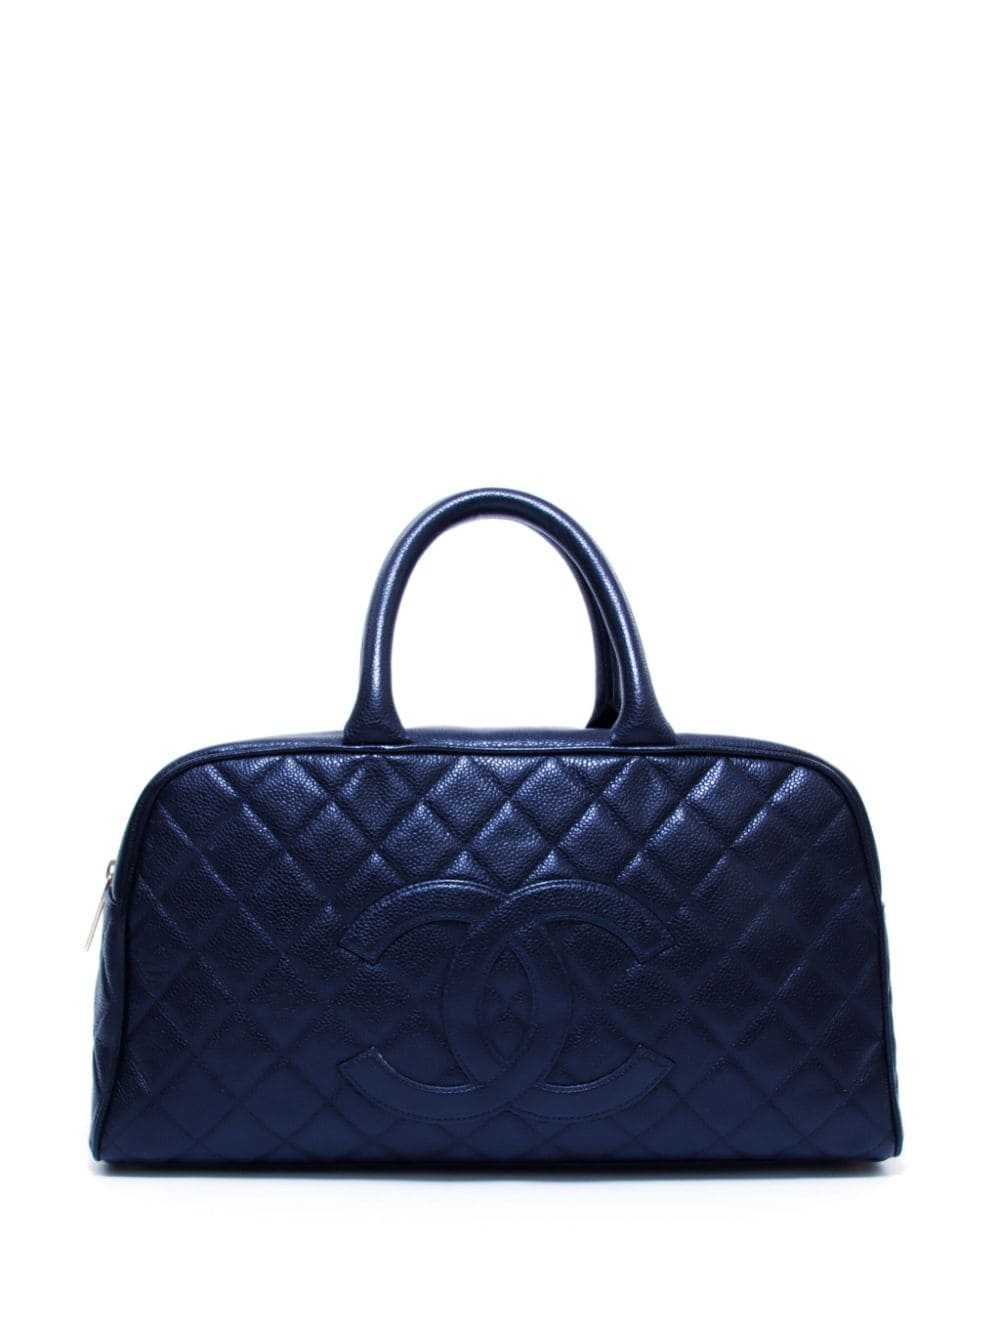 CHANEL Pre-Owned 2003-2004 diamond-quilted handba… - image 1